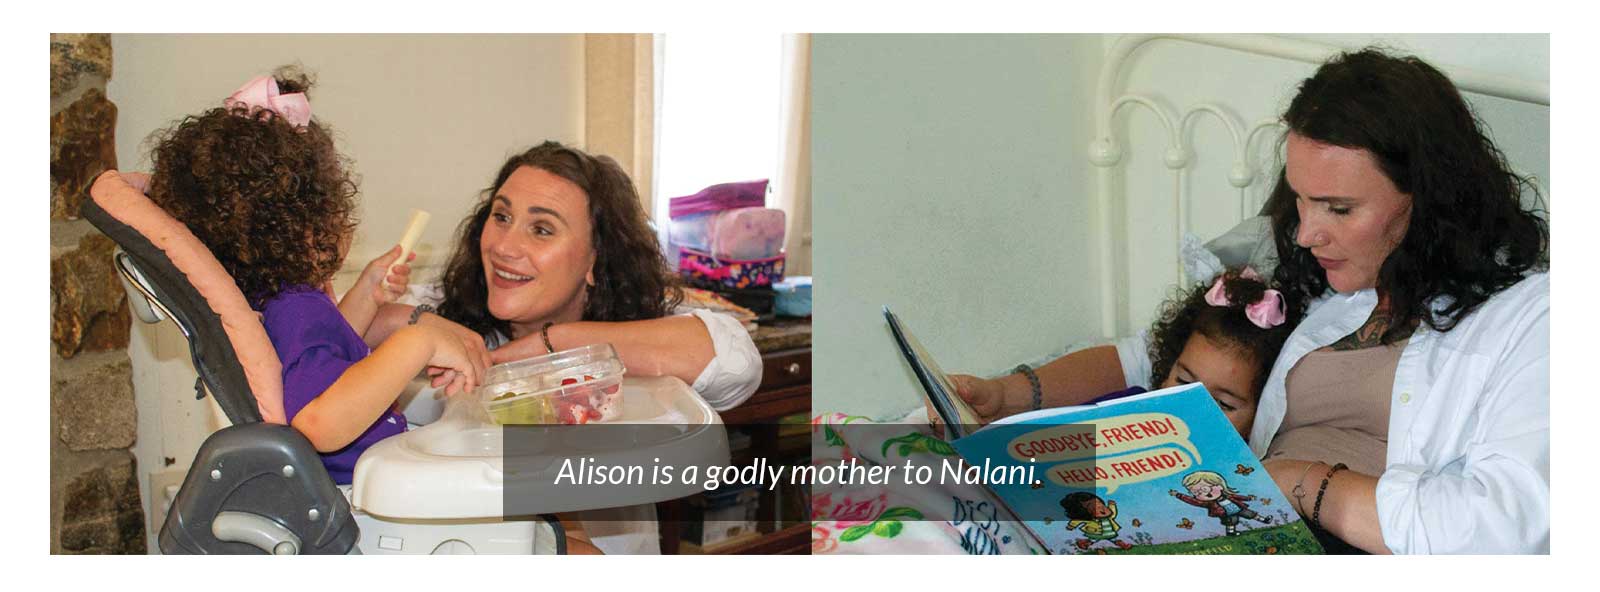 Alison is a godly mother to Nalani